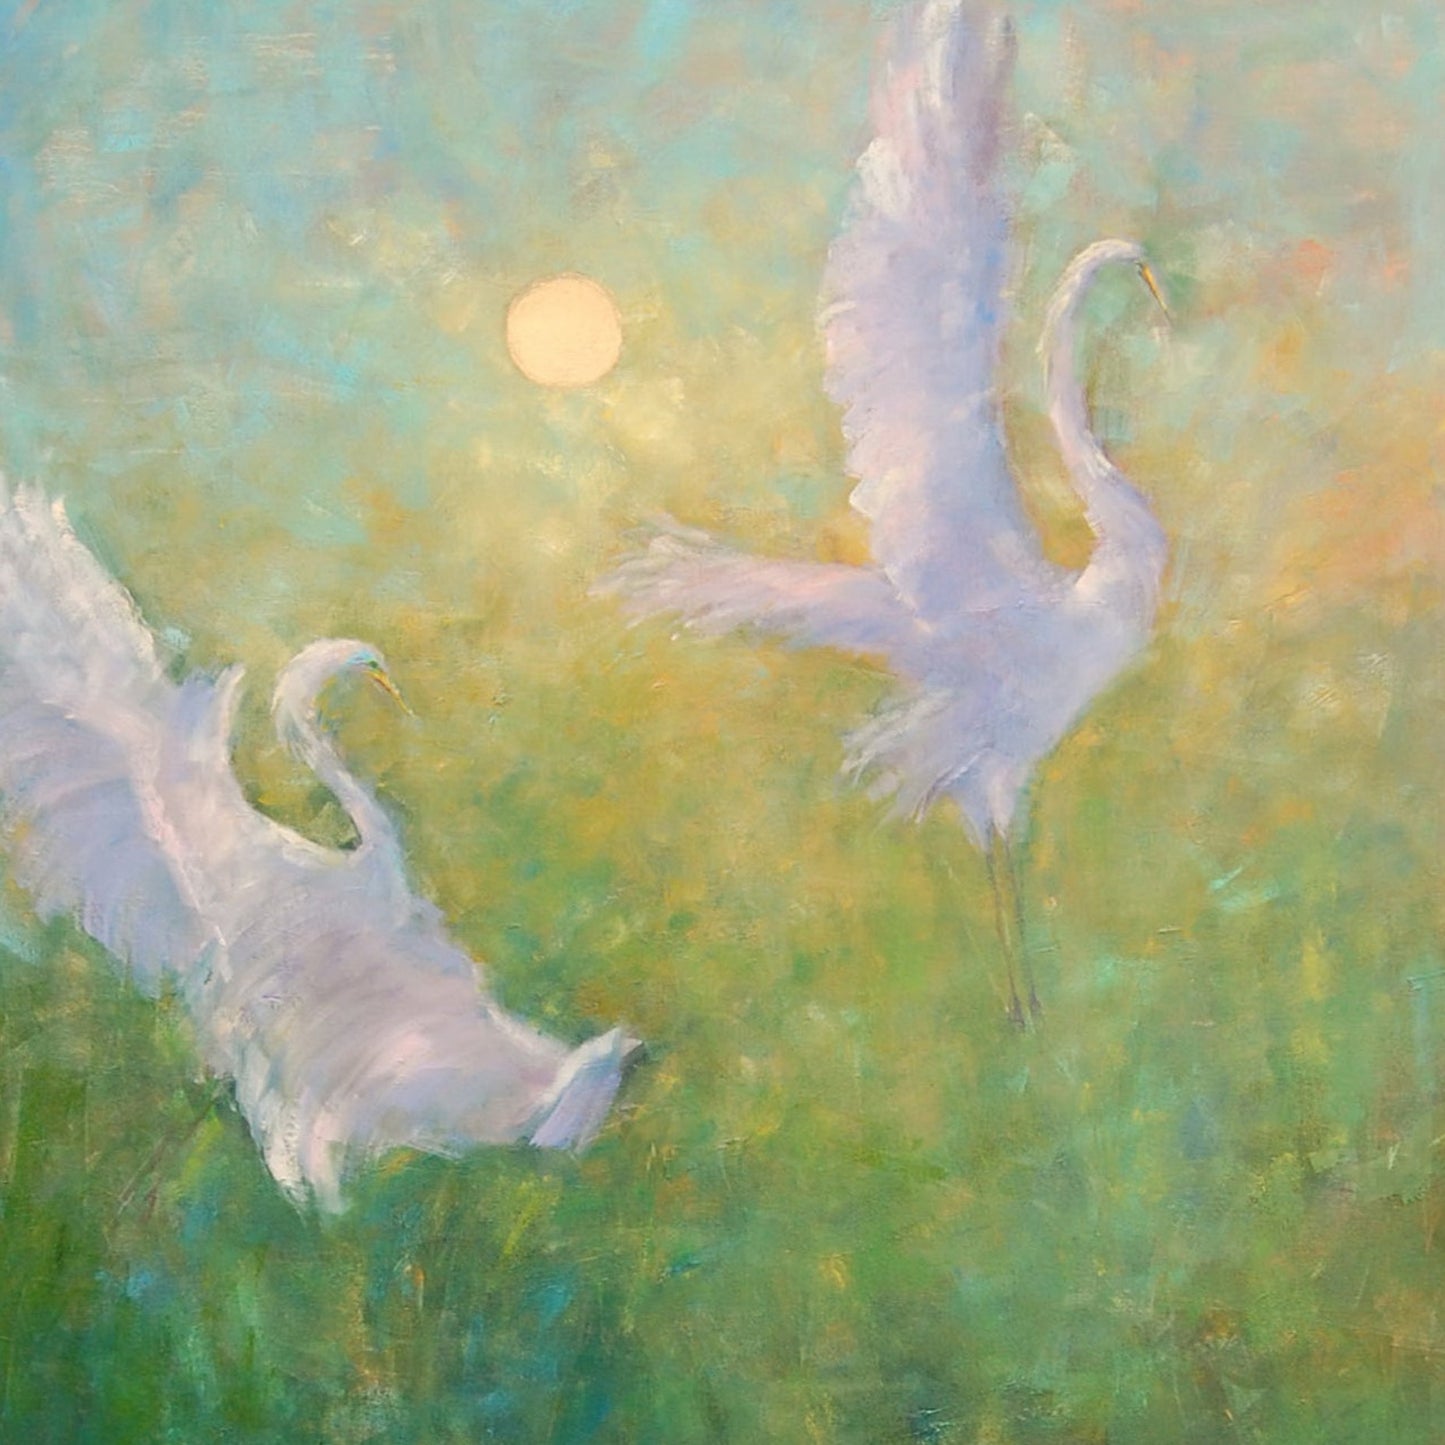 Ascent of the Great Egret I